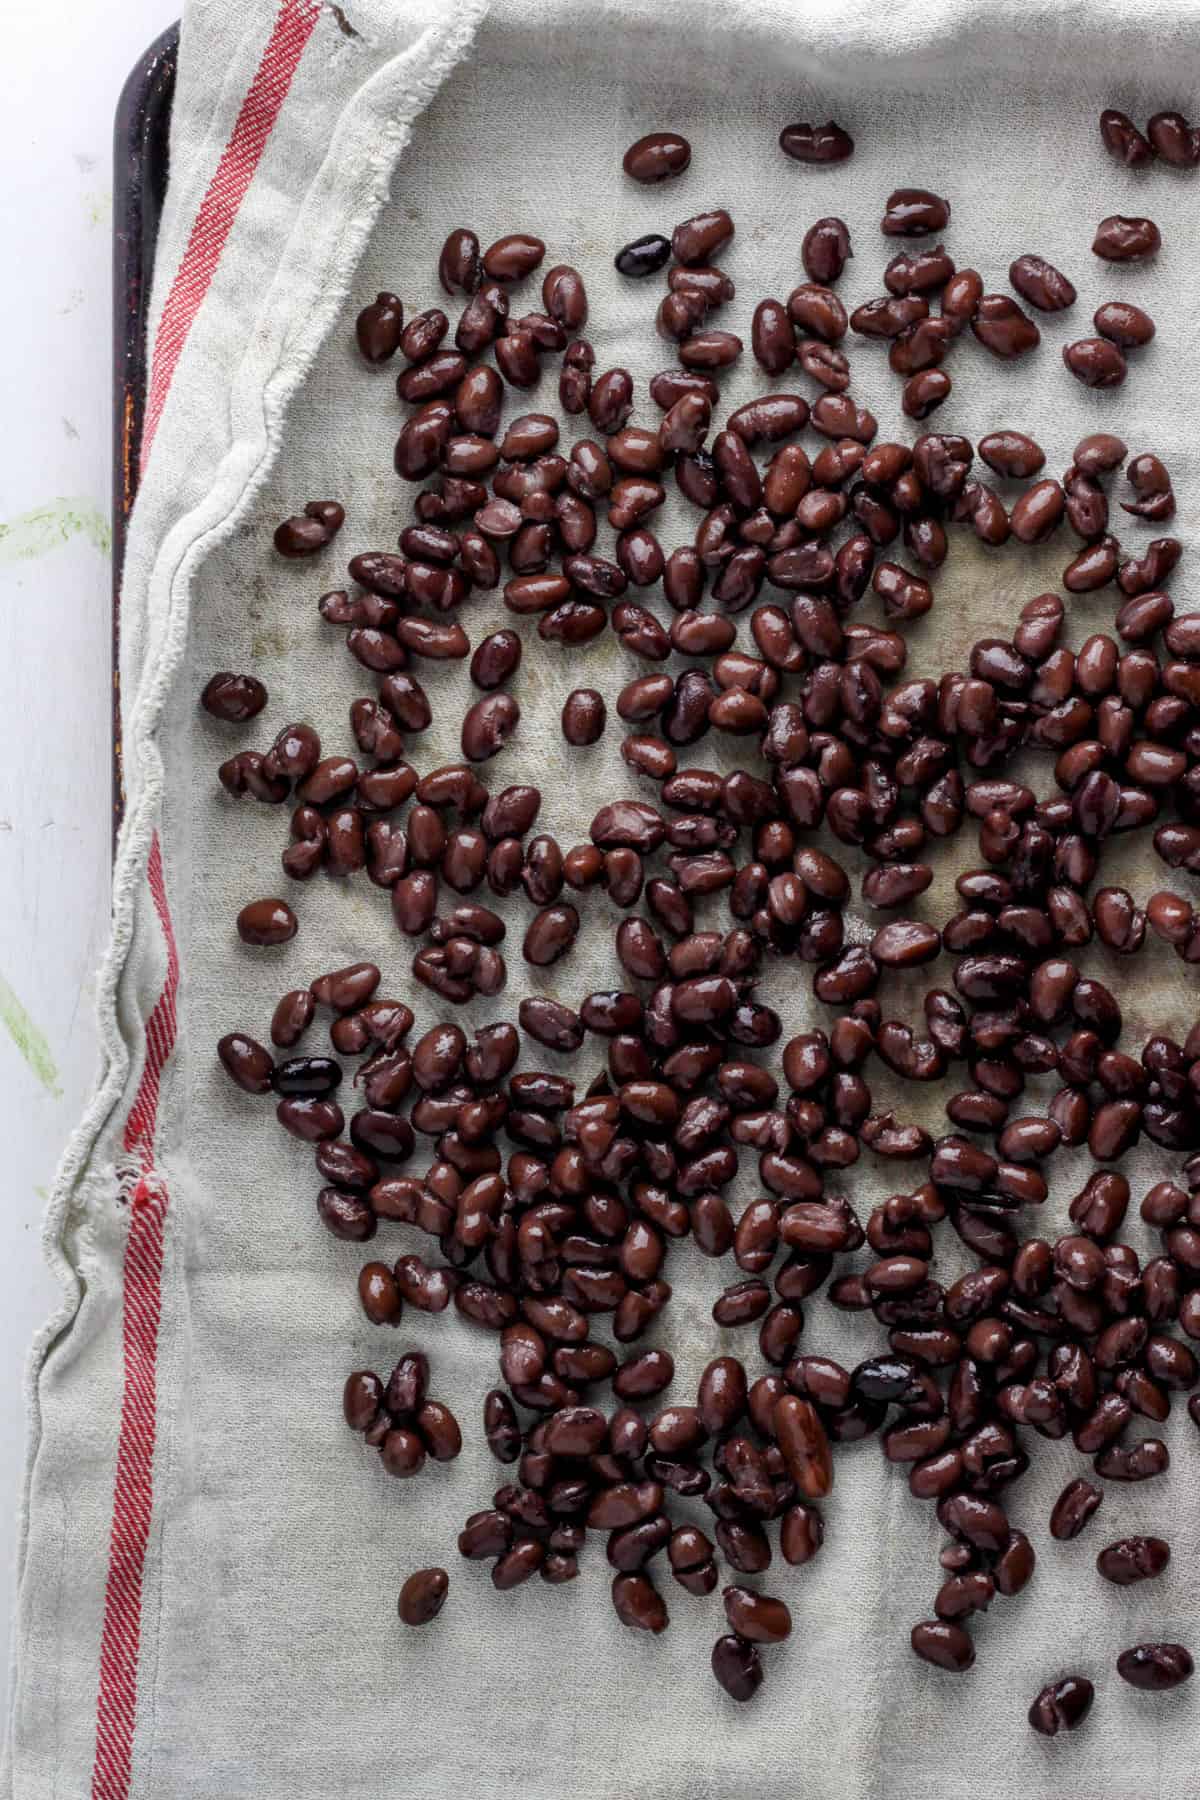 Black beans drying on a kitchen towel lined on a baking sheet.